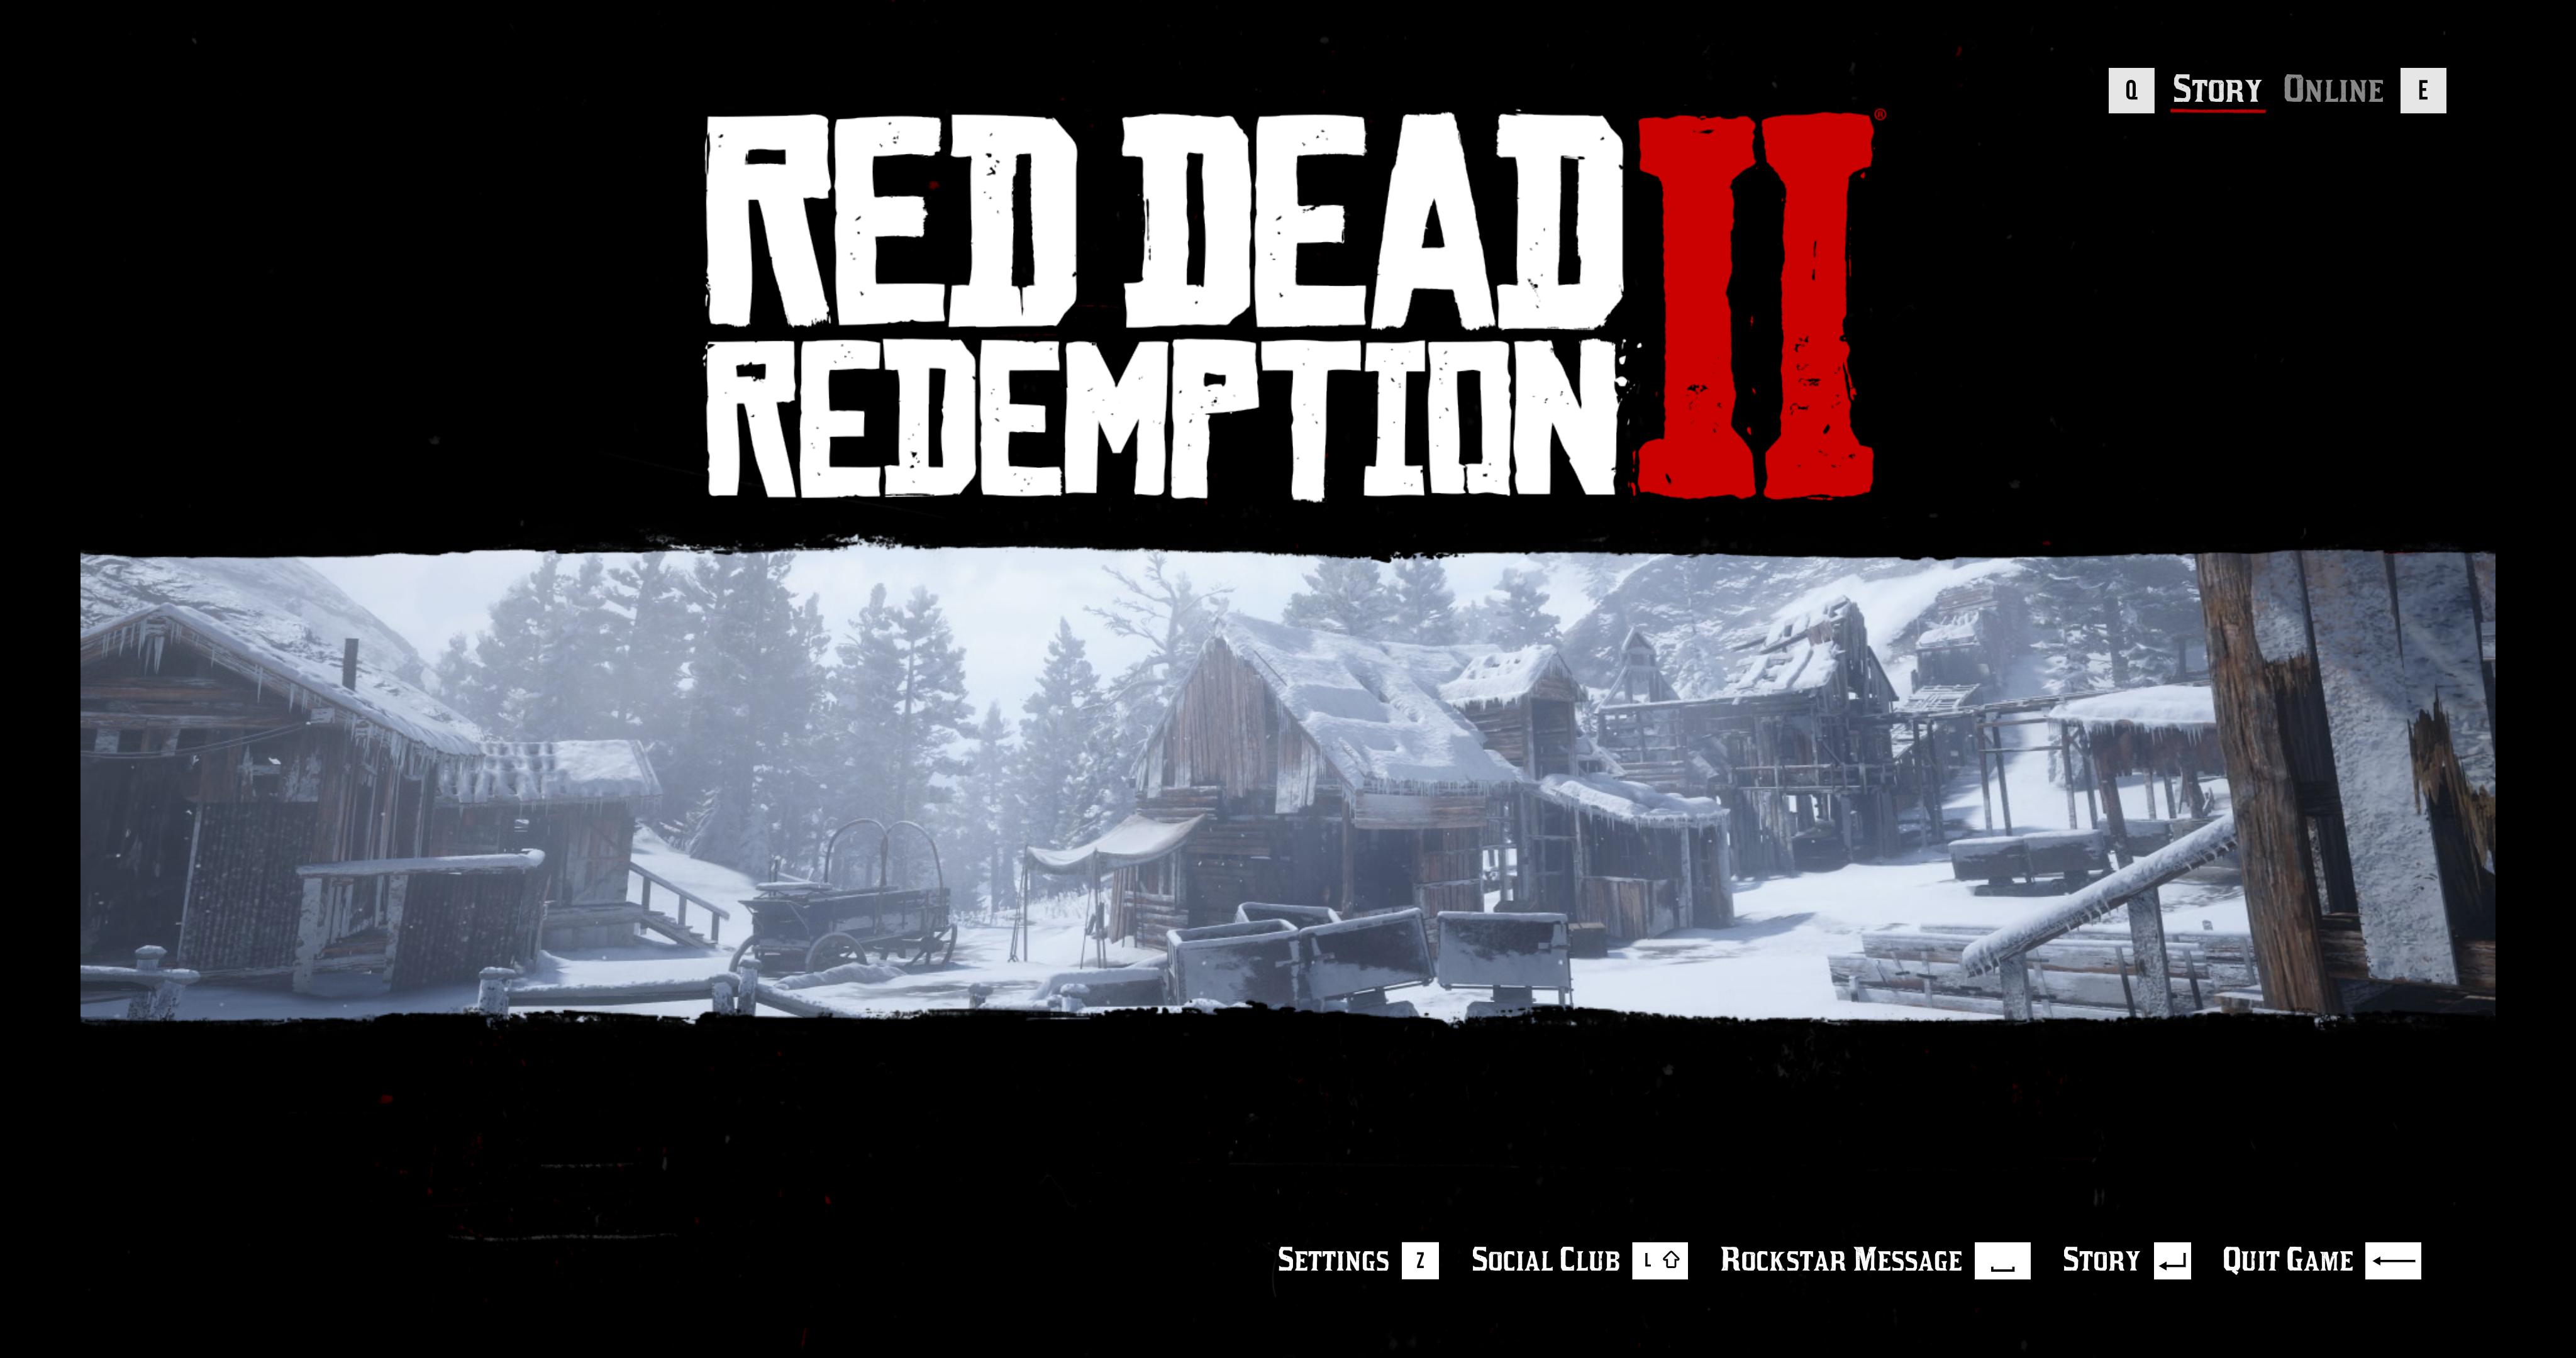 Fixing FPS drops, stuttering issues in Red Dead Redemption 2 on PC